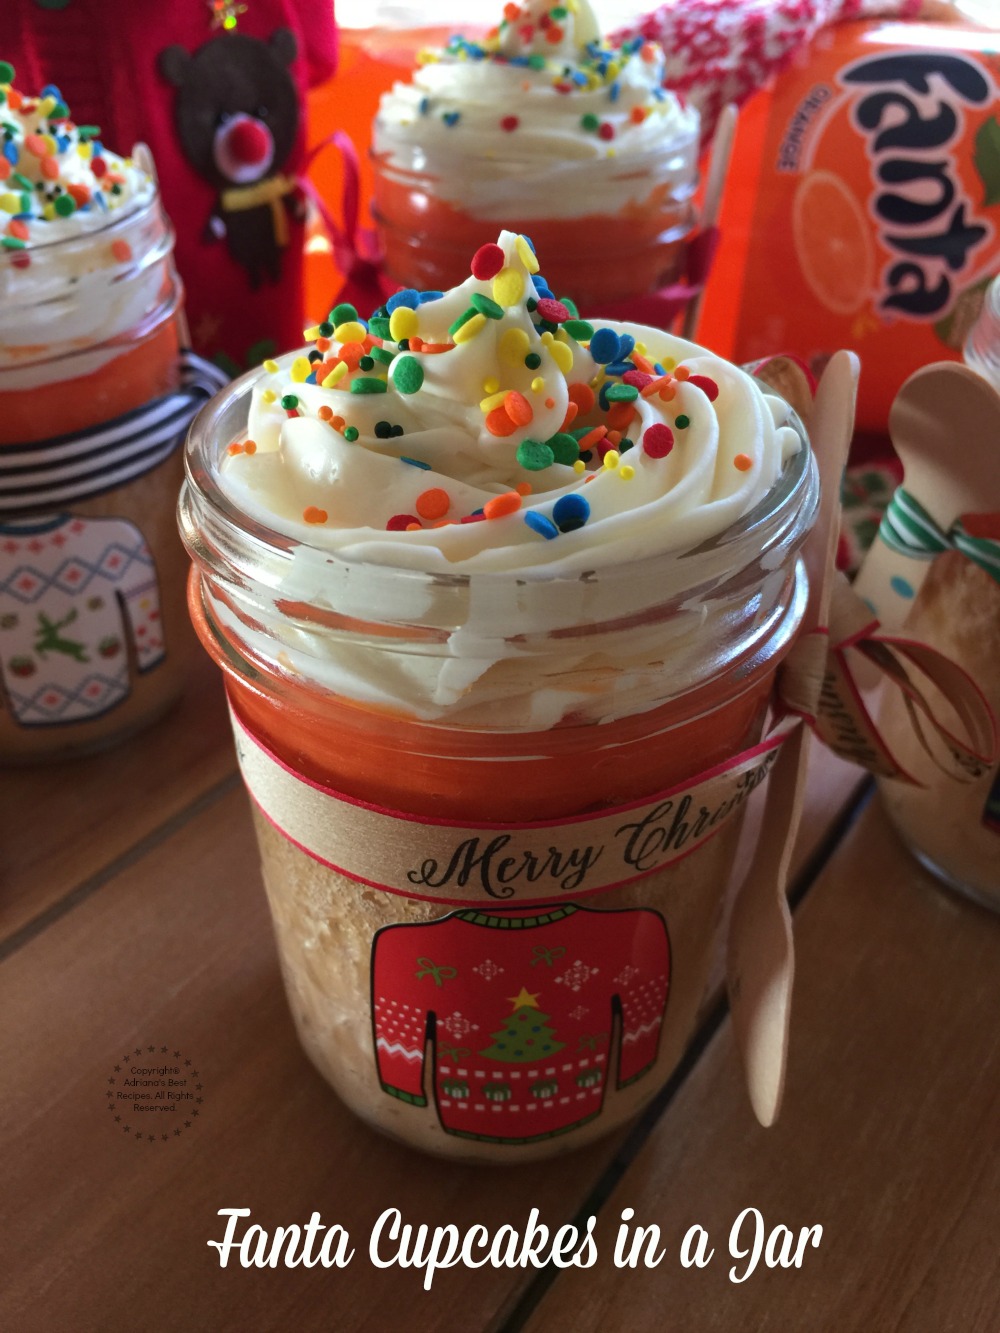 Fanta Cupcakes in a Jar for a cozy charity